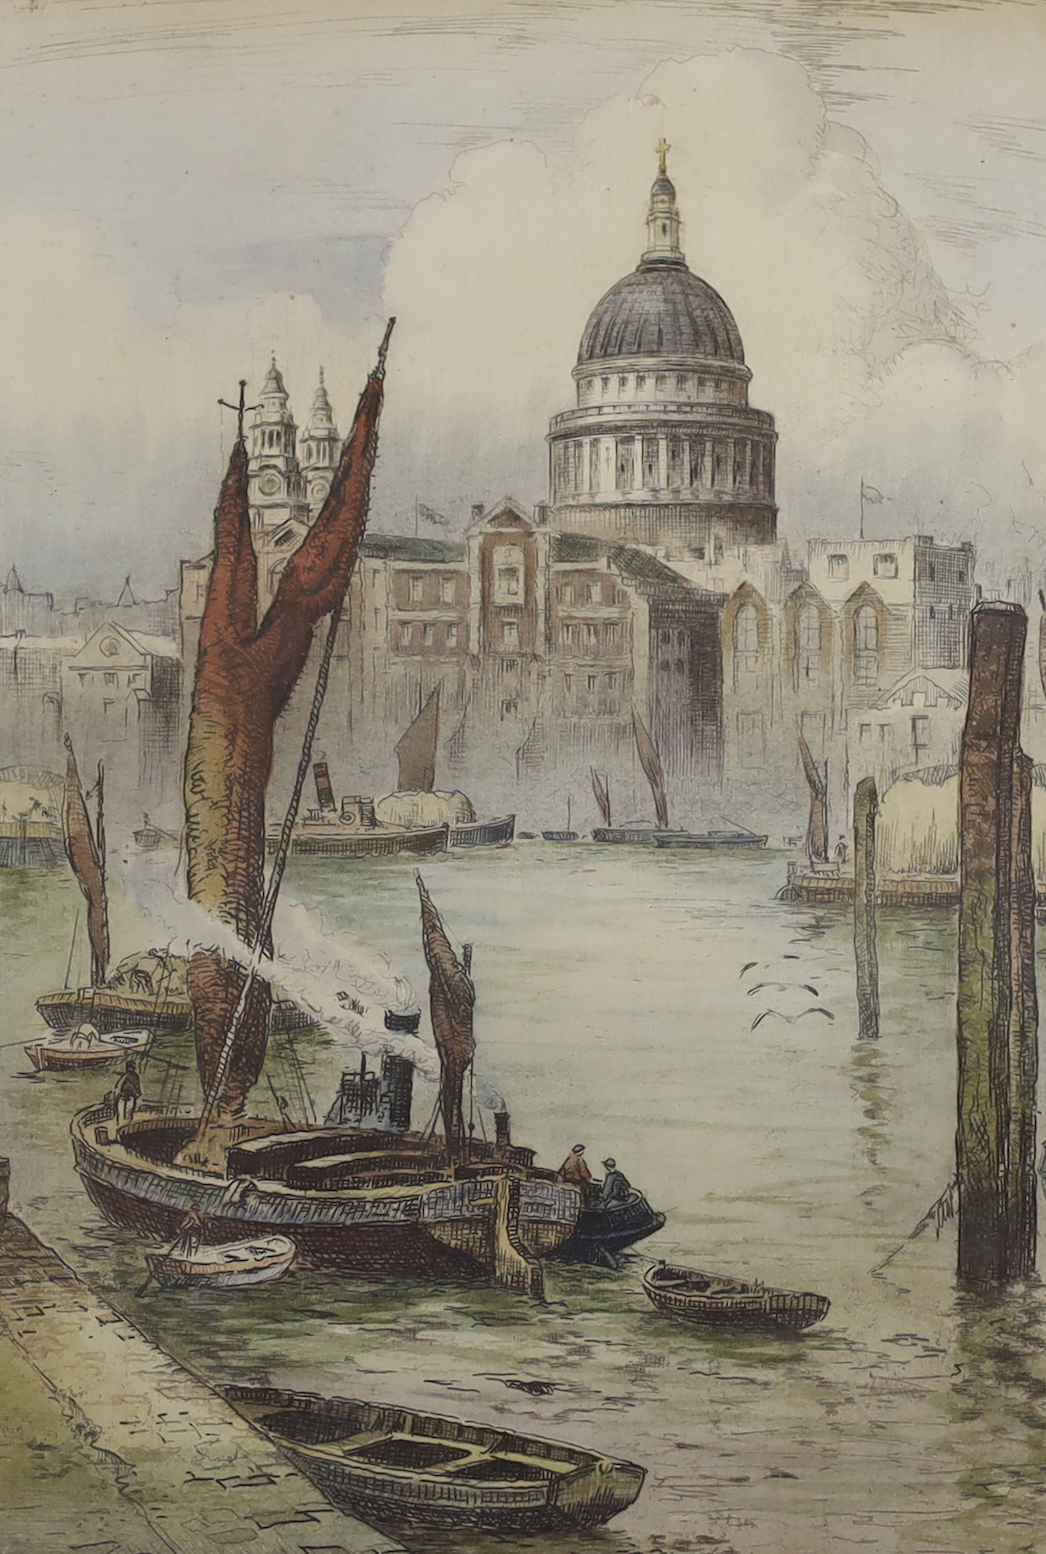 Robert Herdman-Smith (1879-1945), colour etching, 'St Paul's from Bankside', signed in pencil, 25 x 18cm